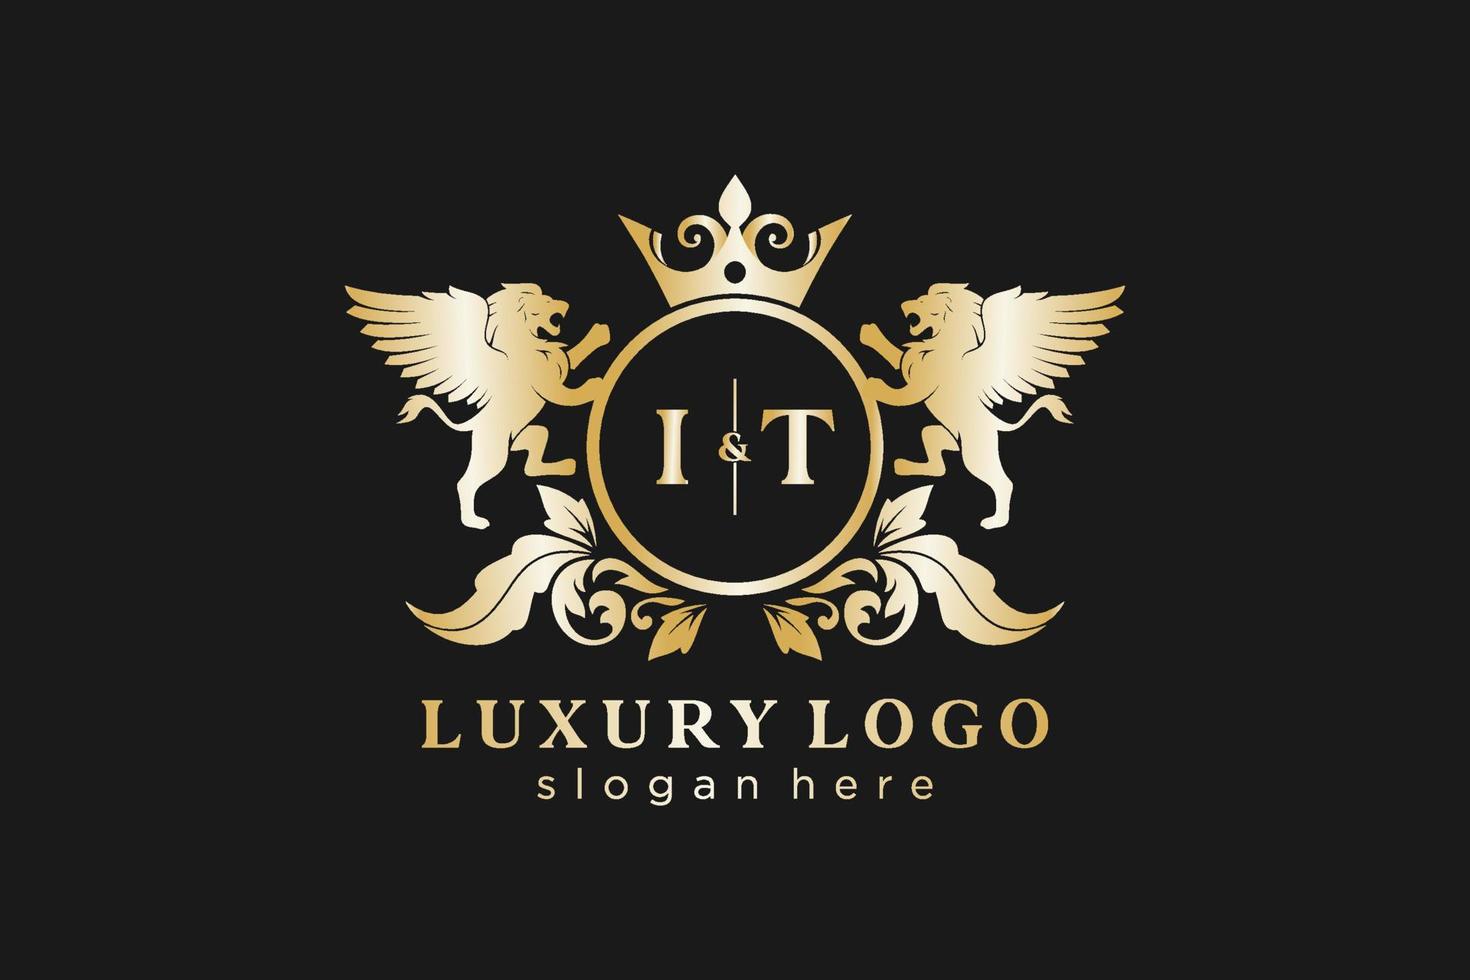 Initial IT Letter Lion Royal Luxury Logo template in vector art for Restaurant, Royalty, Boutique, Cafe, Hotel, Heraldic, Jewelry, Fashion and other vector illustration.